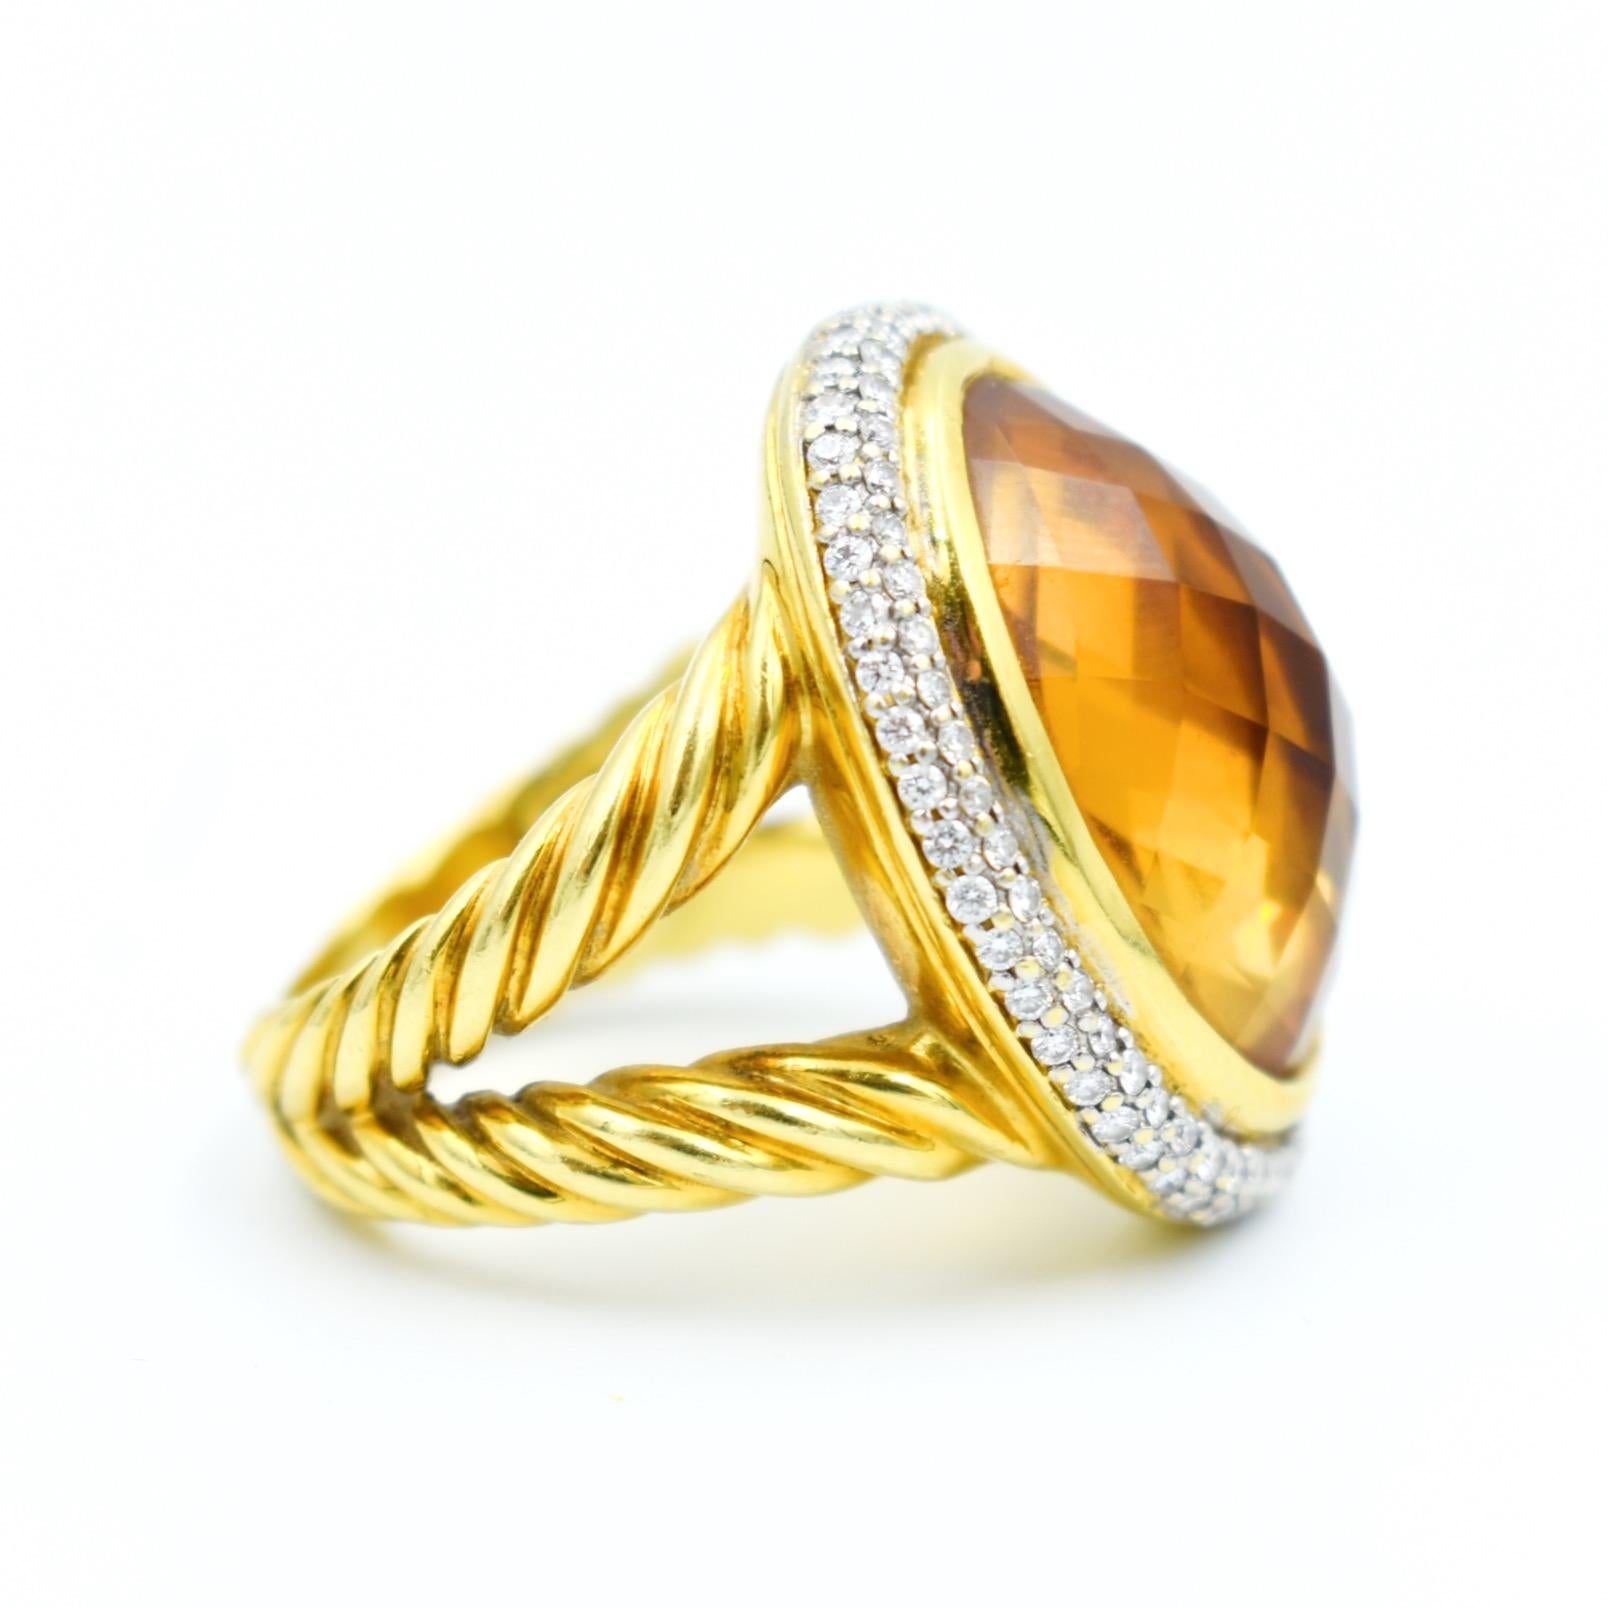 Vintage cocktail ring by jeweler David Yurman in 18k yellow gold. It features a checker-cut champagne topaz weighing approximately 12.5 carats (18.0 x 13.0 x 8.0 mm) in a double surround of brilliant-cut diamonds weighing approximately 1 carat in